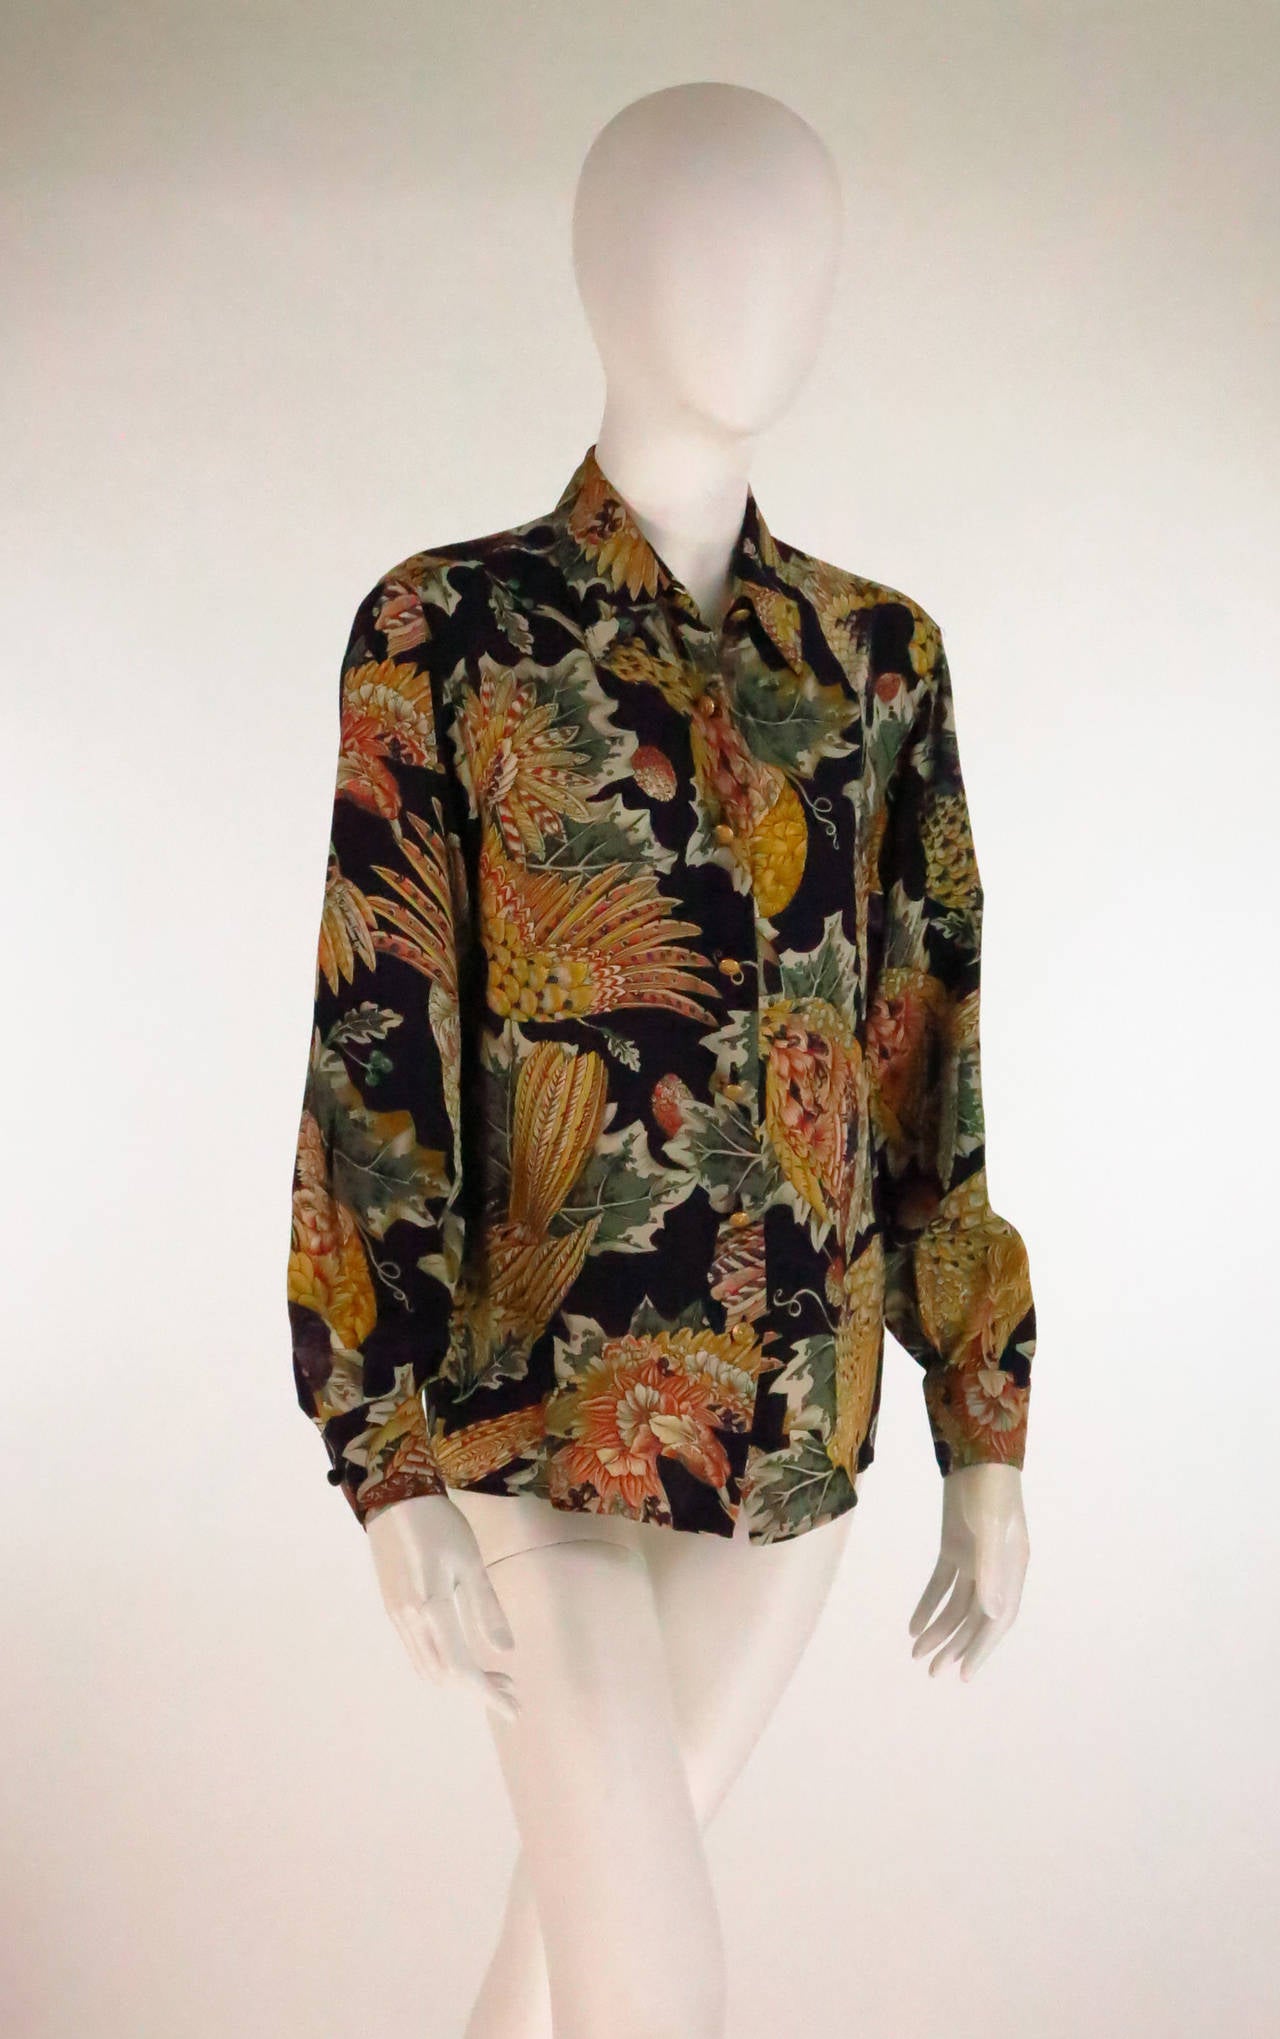 Gorgeous Ferragamo birds of paradise silk print blouse...This was a signature print for Ferragamo and with the black background, this version is a standout...
Long sleeve blouse closes at the front with matte gold logo buttons, straight hem